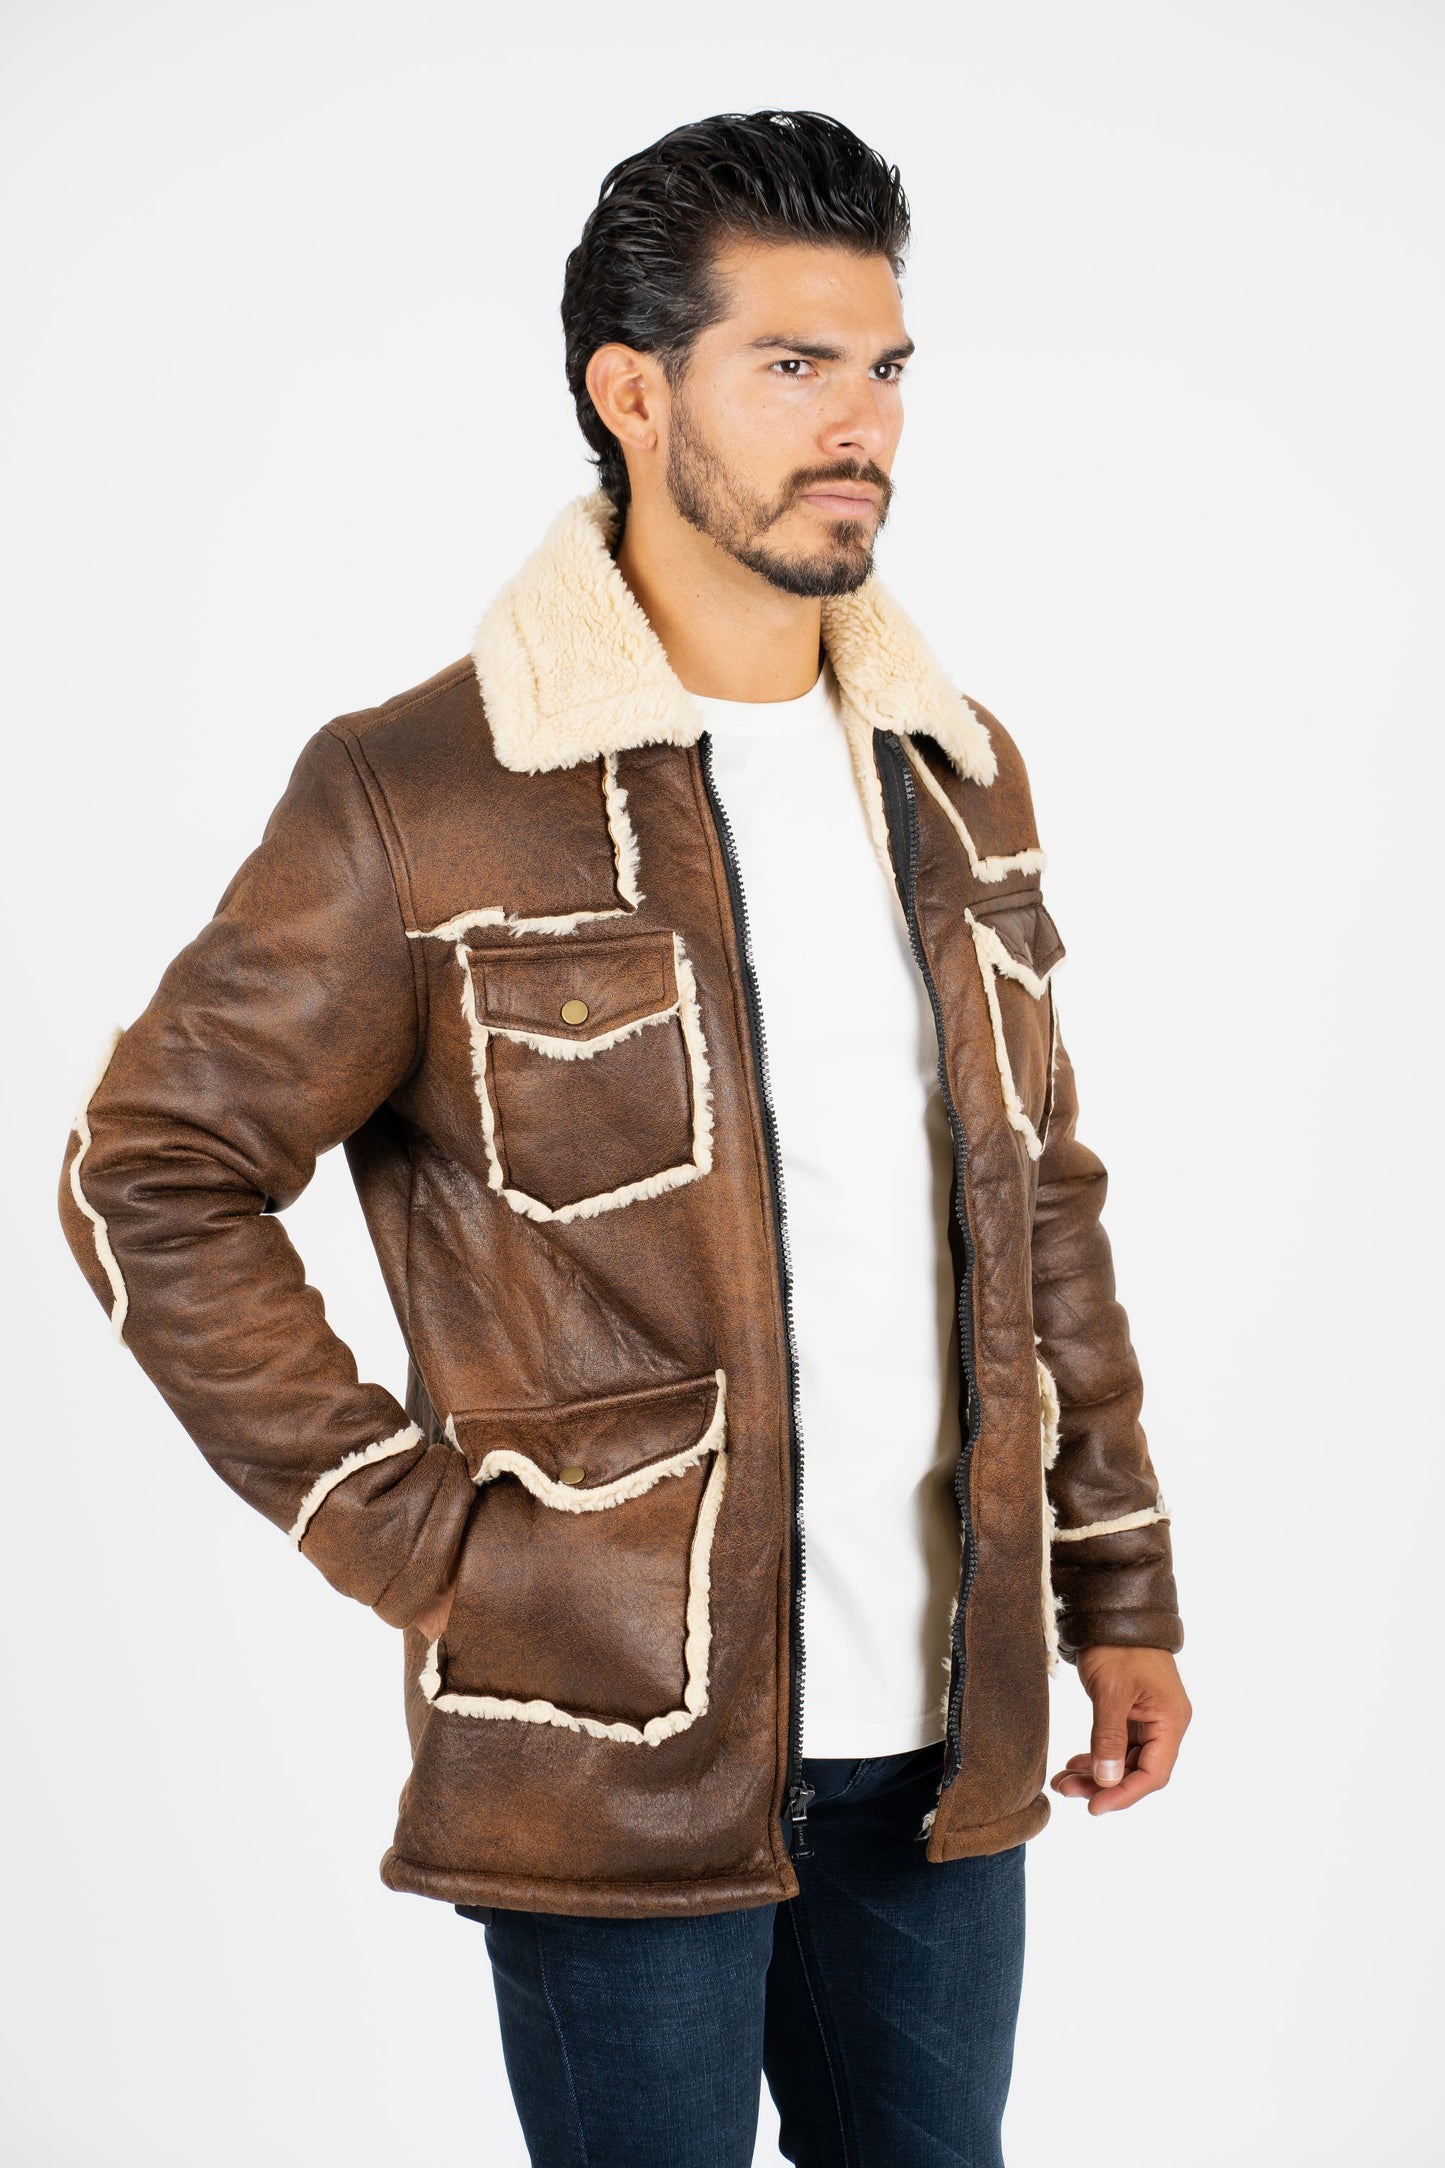 Men's Brown Suede Jacket w/ Faux Shearling-lined